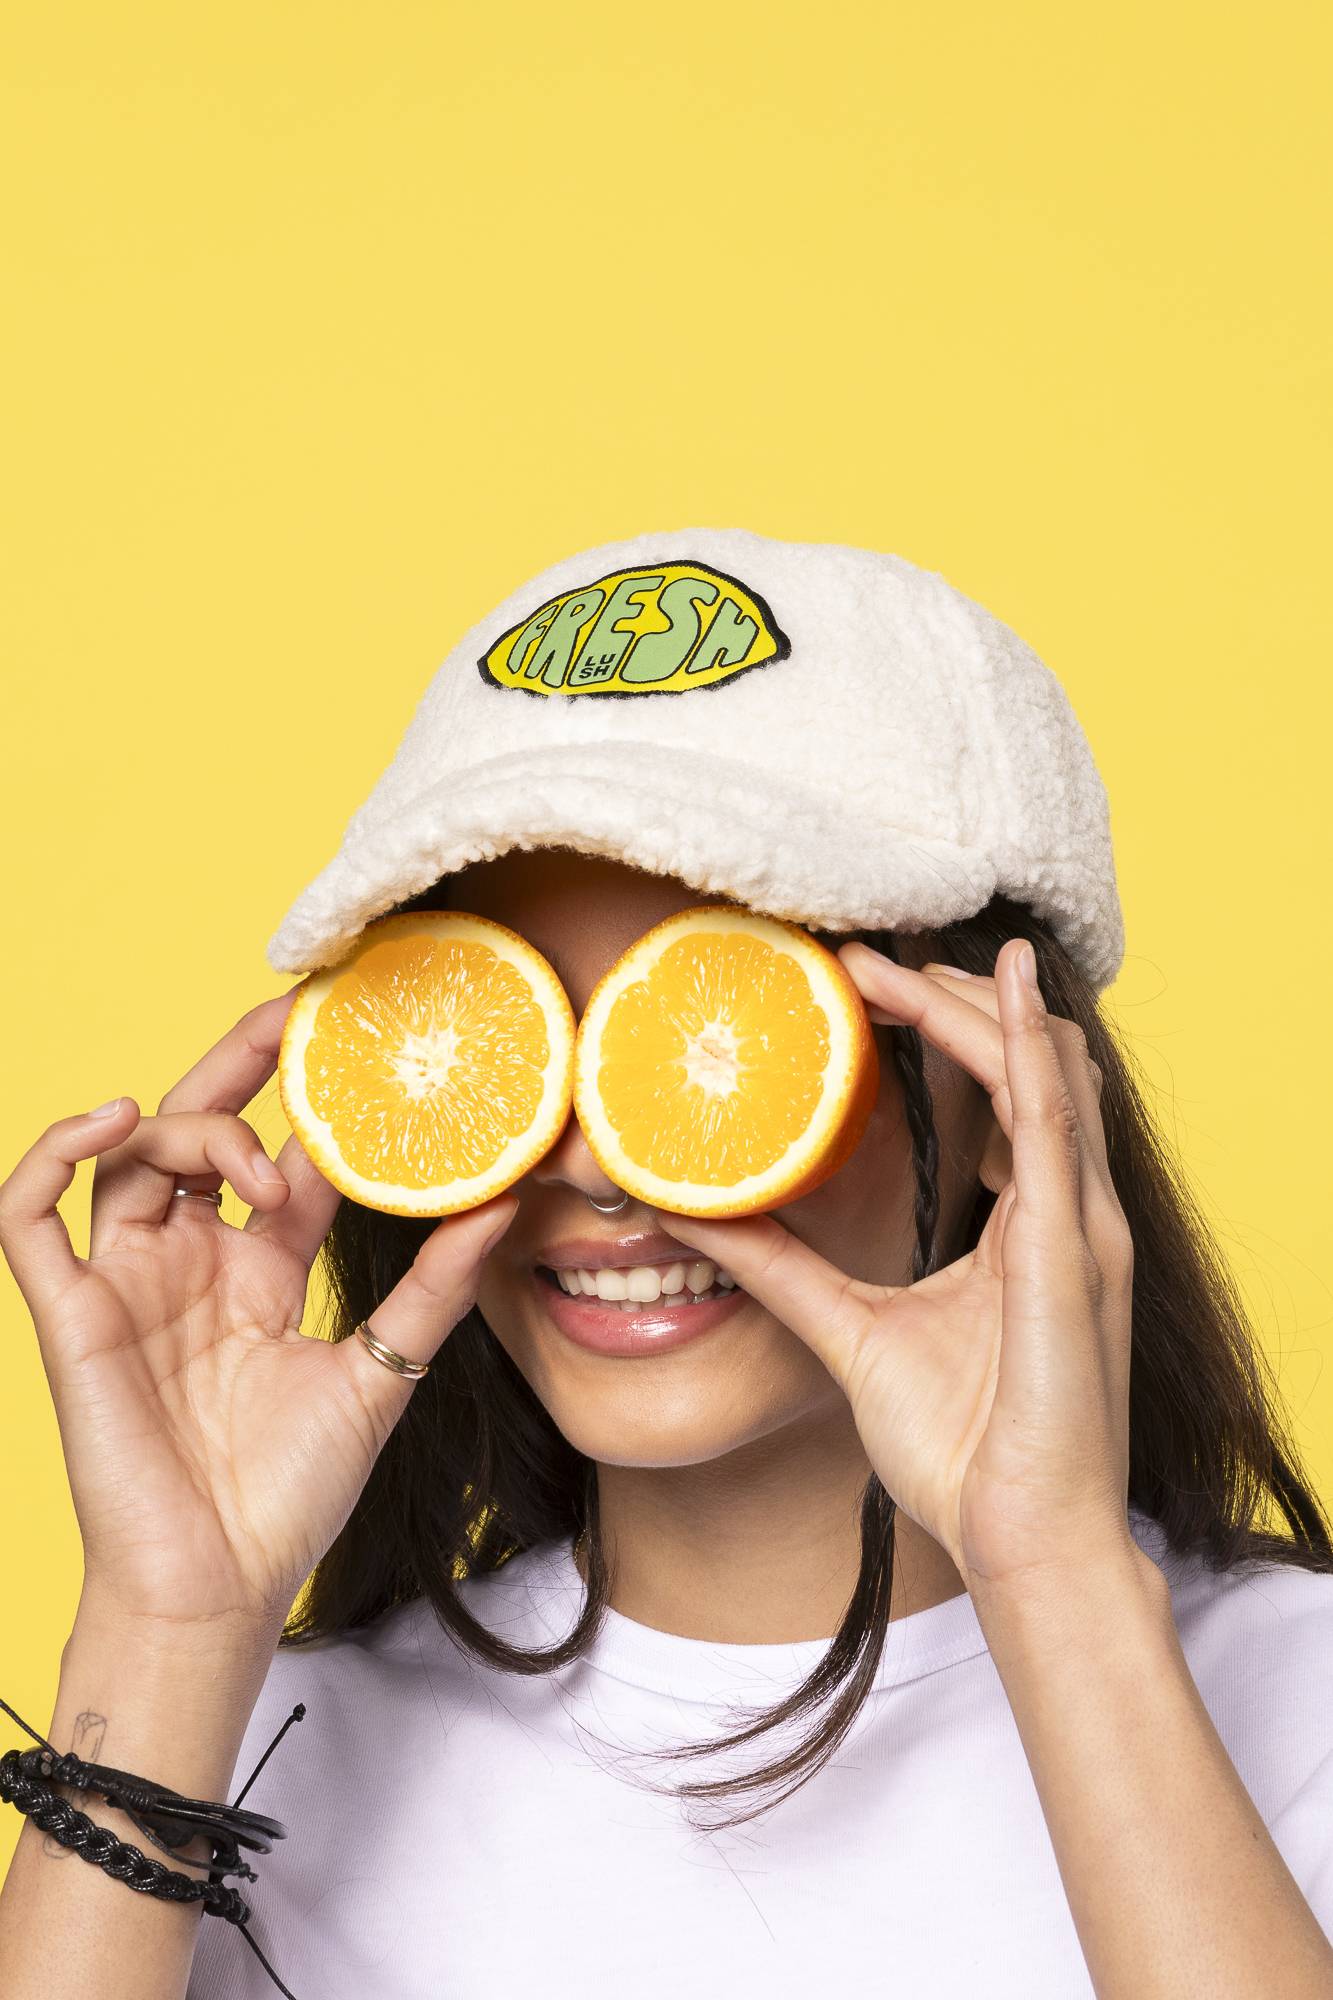 Image shows the model wearing the Fresh Values Iron-on patch on their cap hat as they hold orange slices to their eyes. 